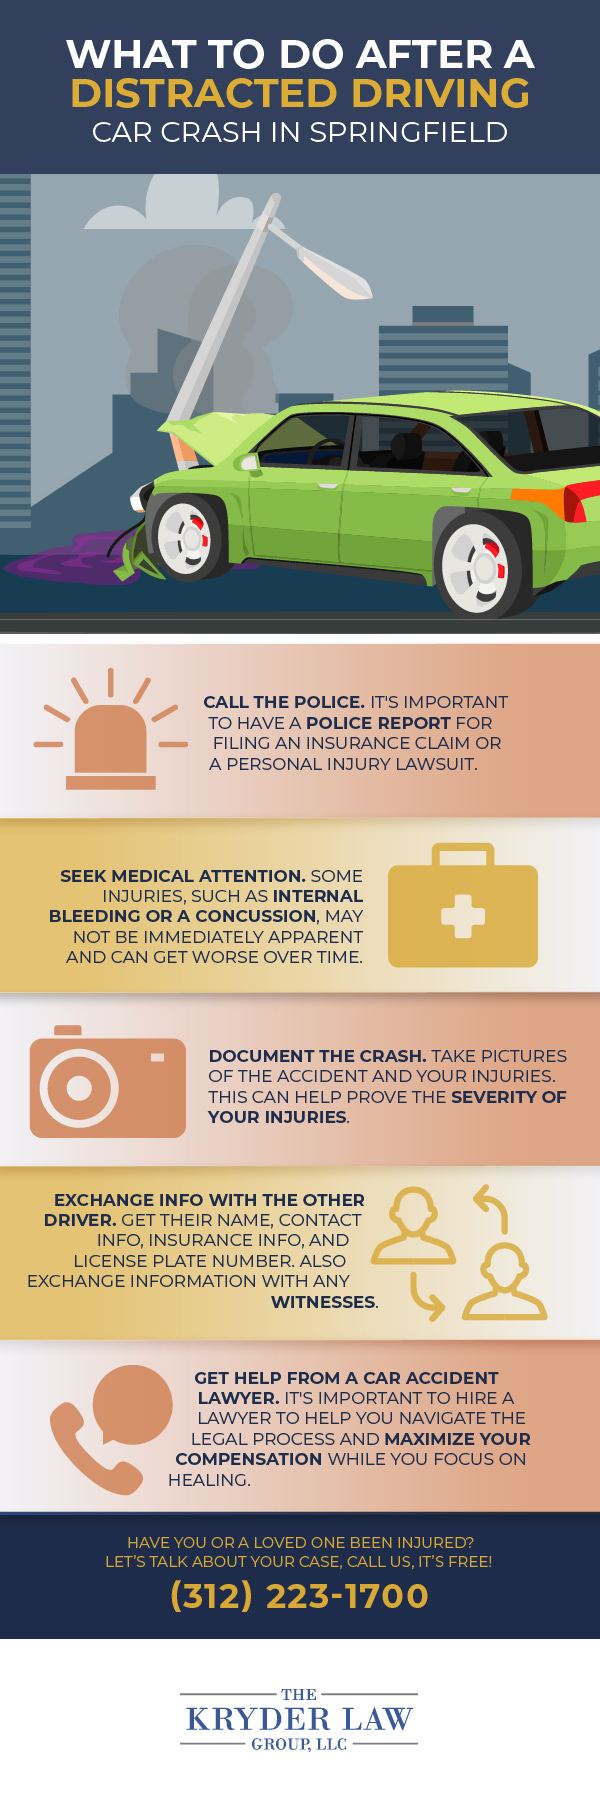 What to Do After a Distracted Driving Car Crash in Springfield Infographic